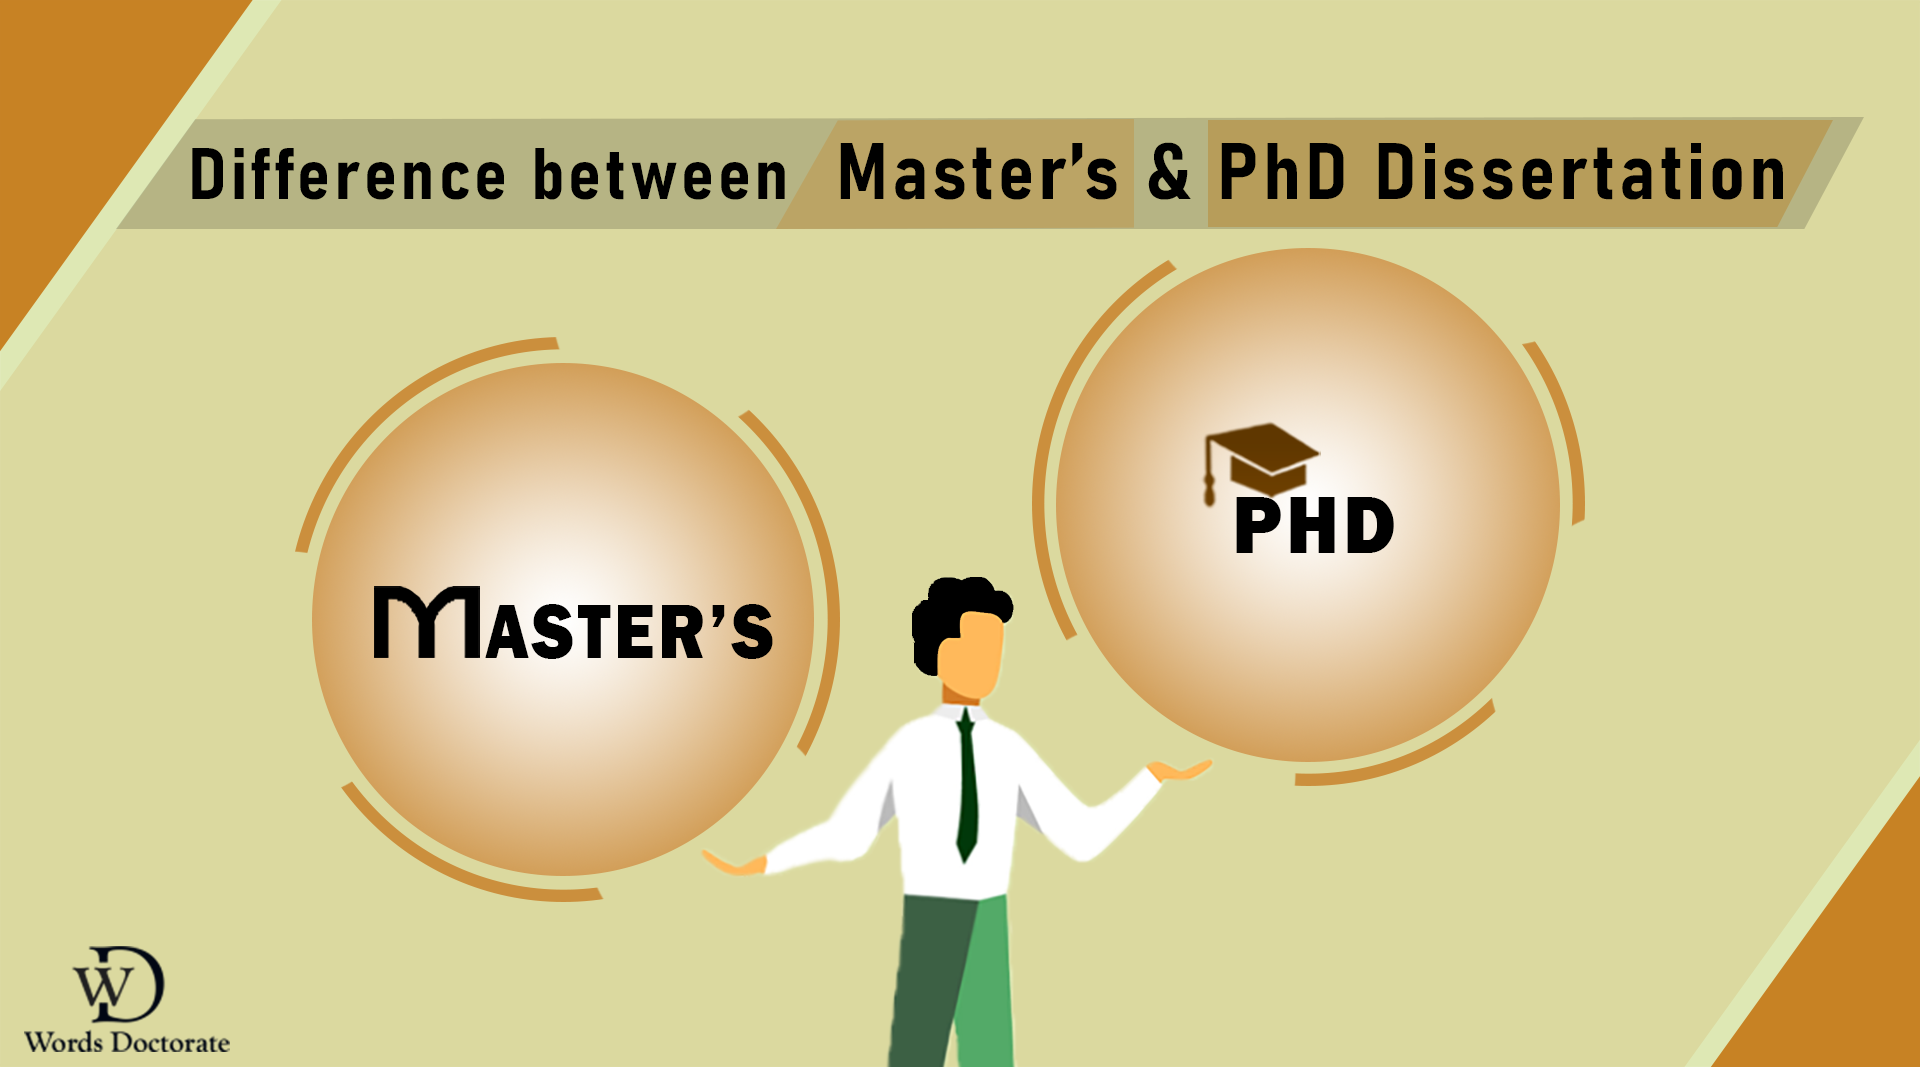 masters and phd together